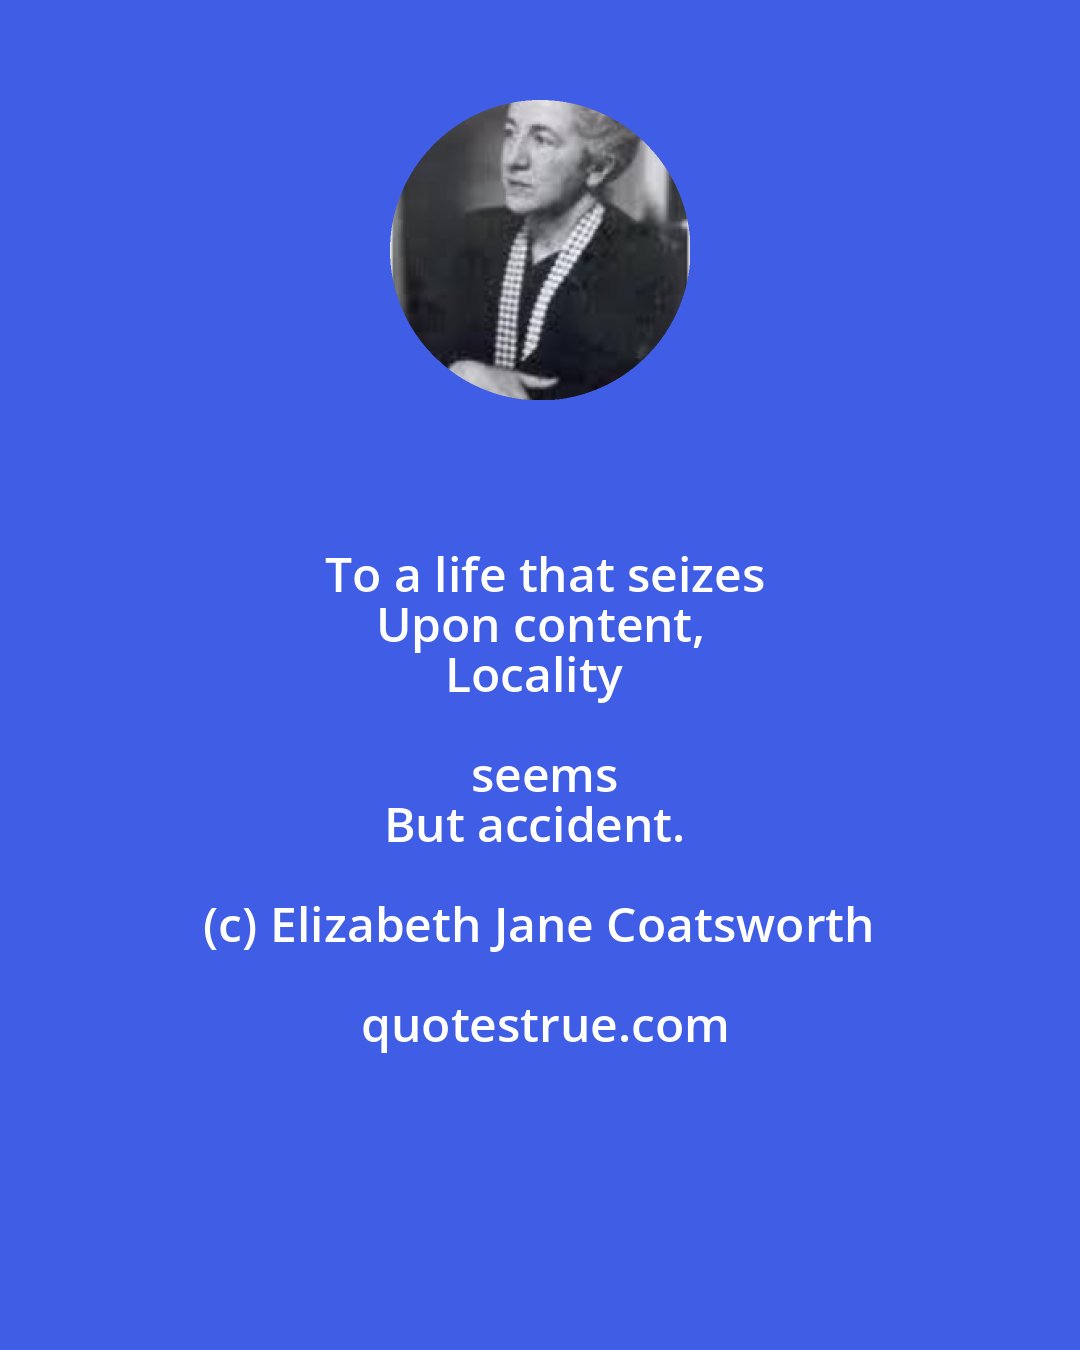 Elizabeth Jane Coatsworth: To a life that seizes
Upon content,
Locality seems
But accident.